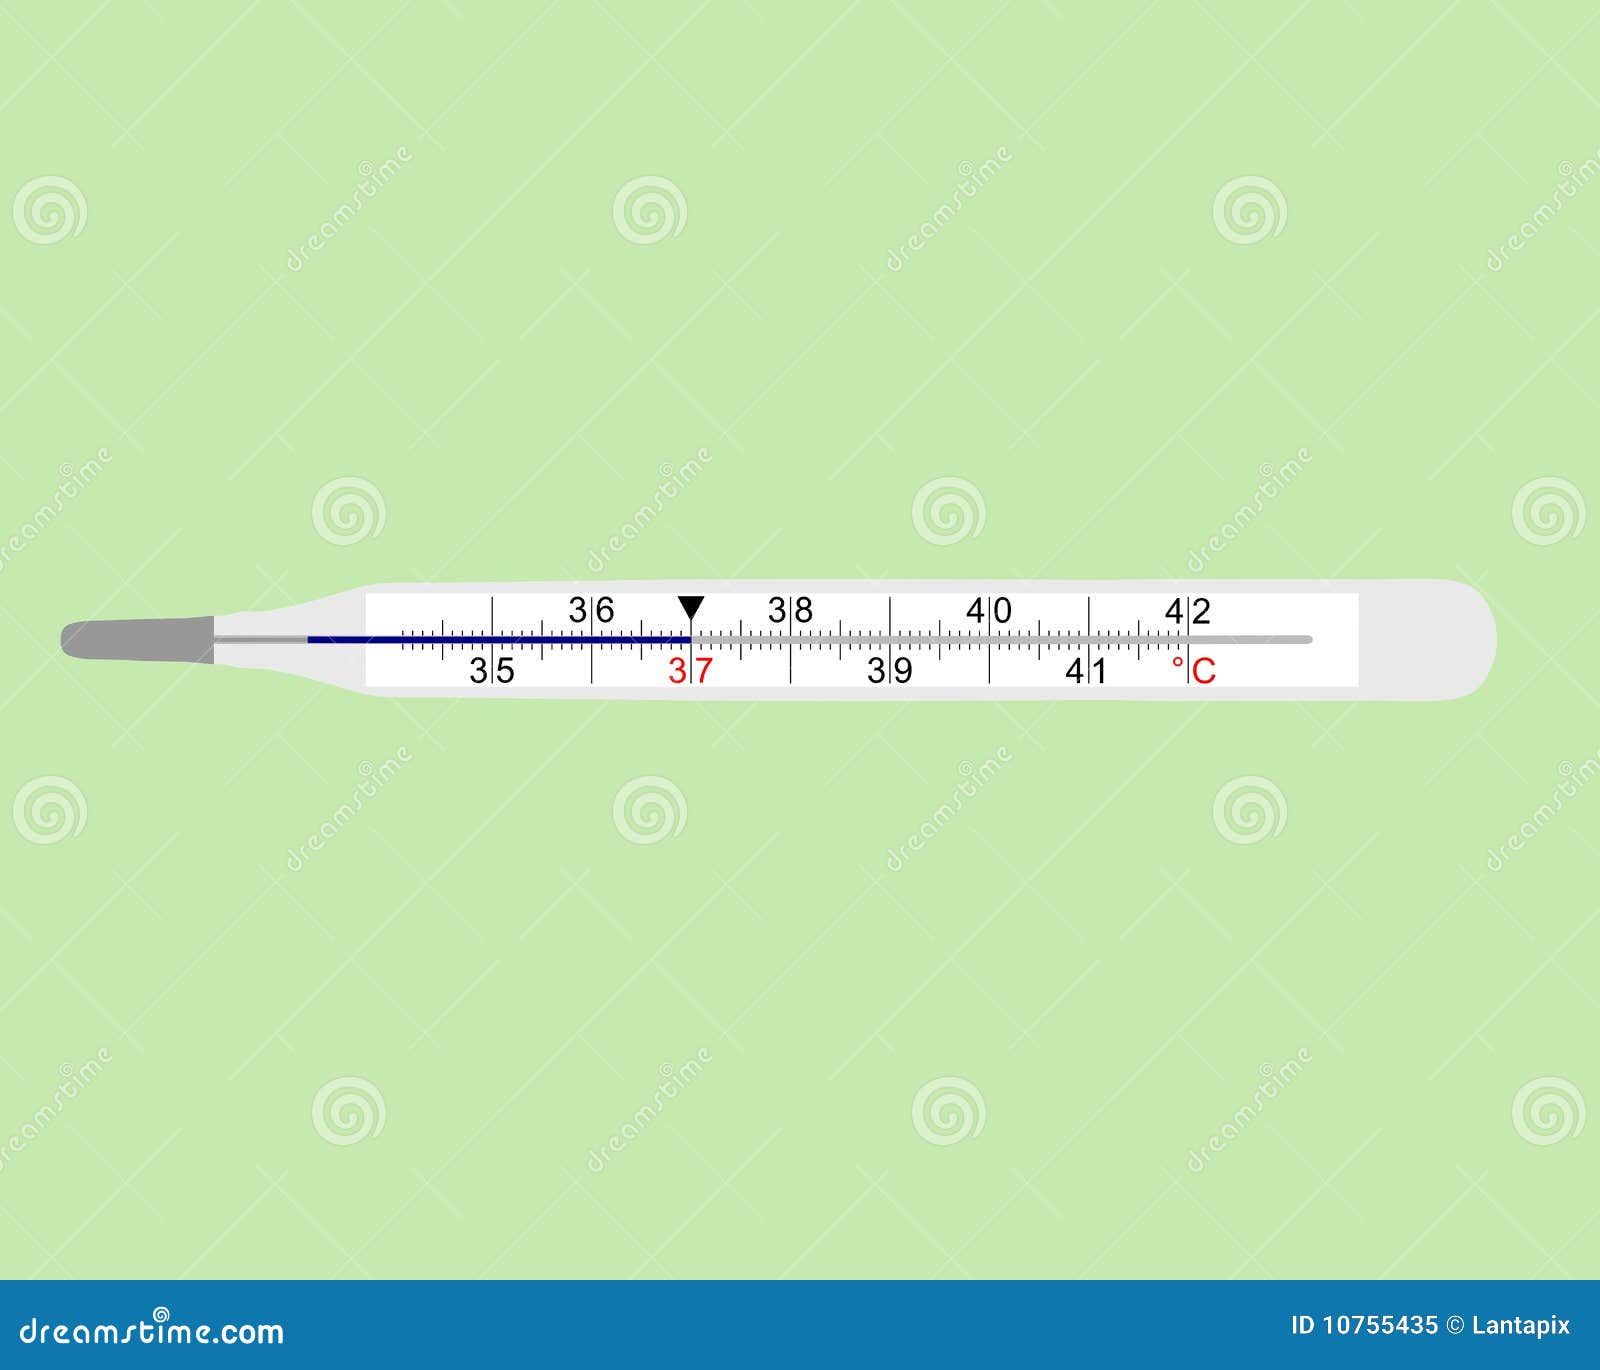 https://thumbs.dreamstime.com/z/analog-clinical-thermometer-10755435.jpg